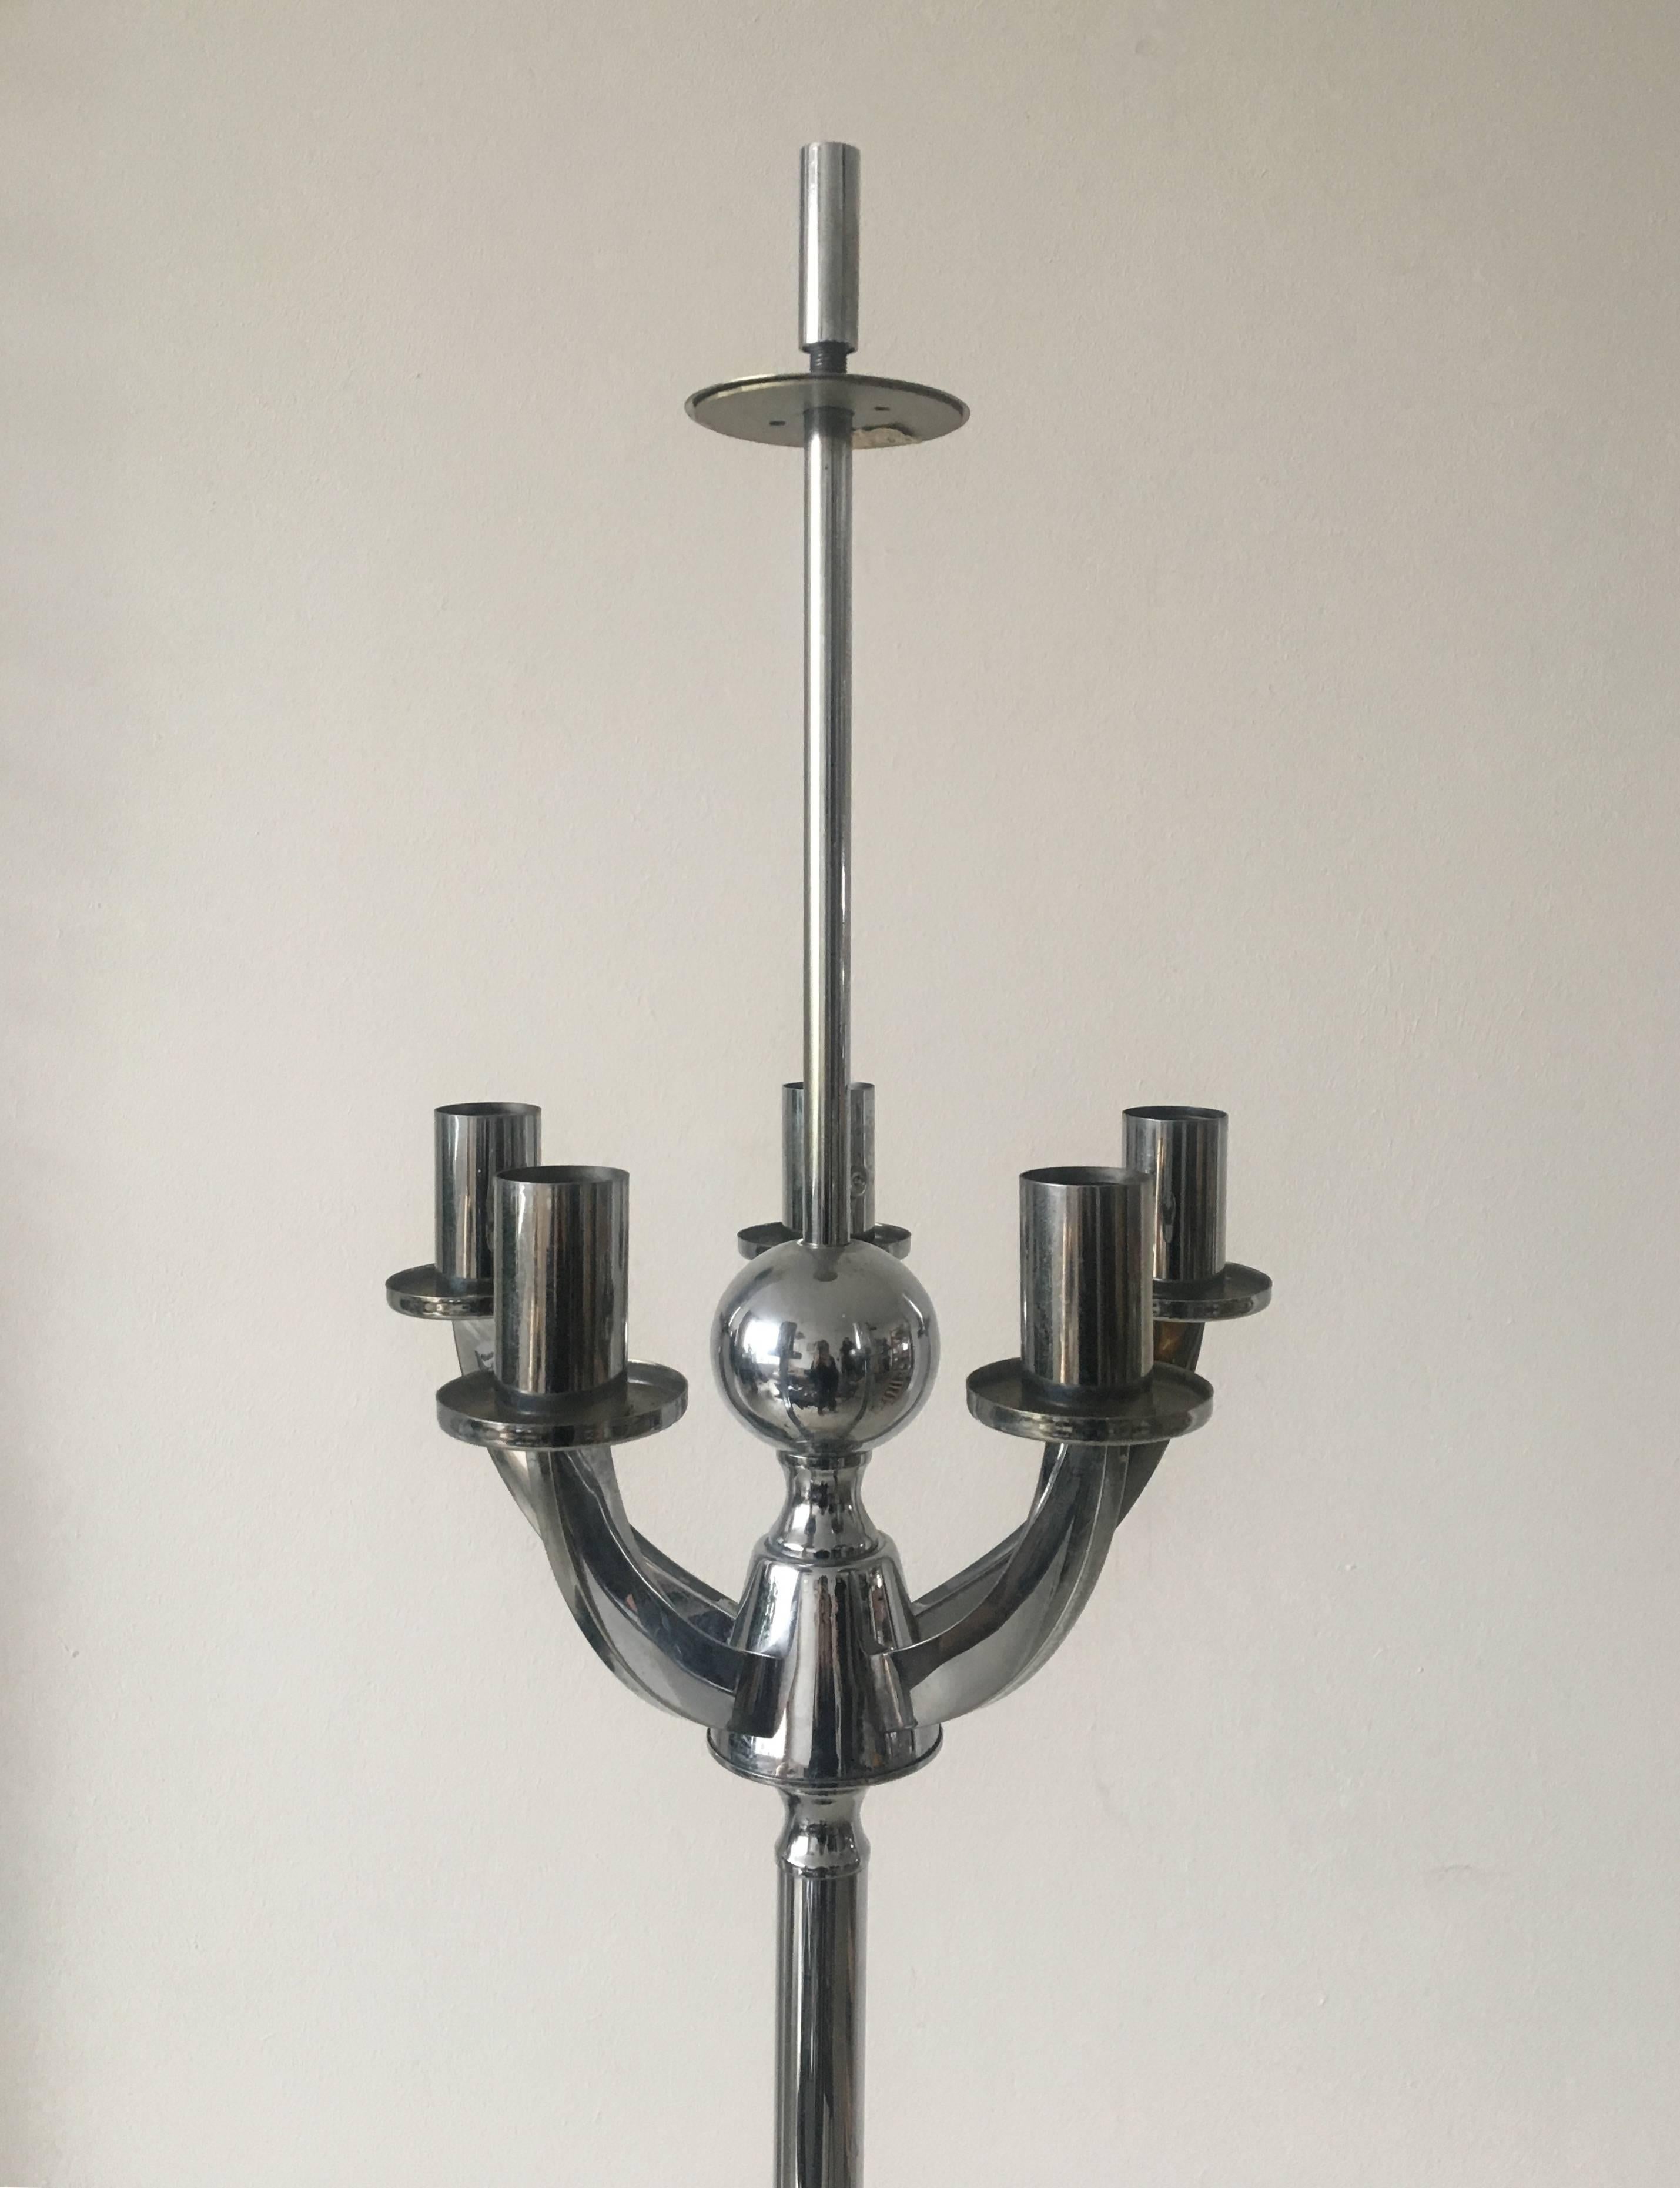 This wonderful lamp features a metal Chromed foot with five arms and an umbrella style shade in fabric. However it's designer and manufacturer remains unknown it's most likely produced by Staff Leuchten but gives you the idea of a Italian design as